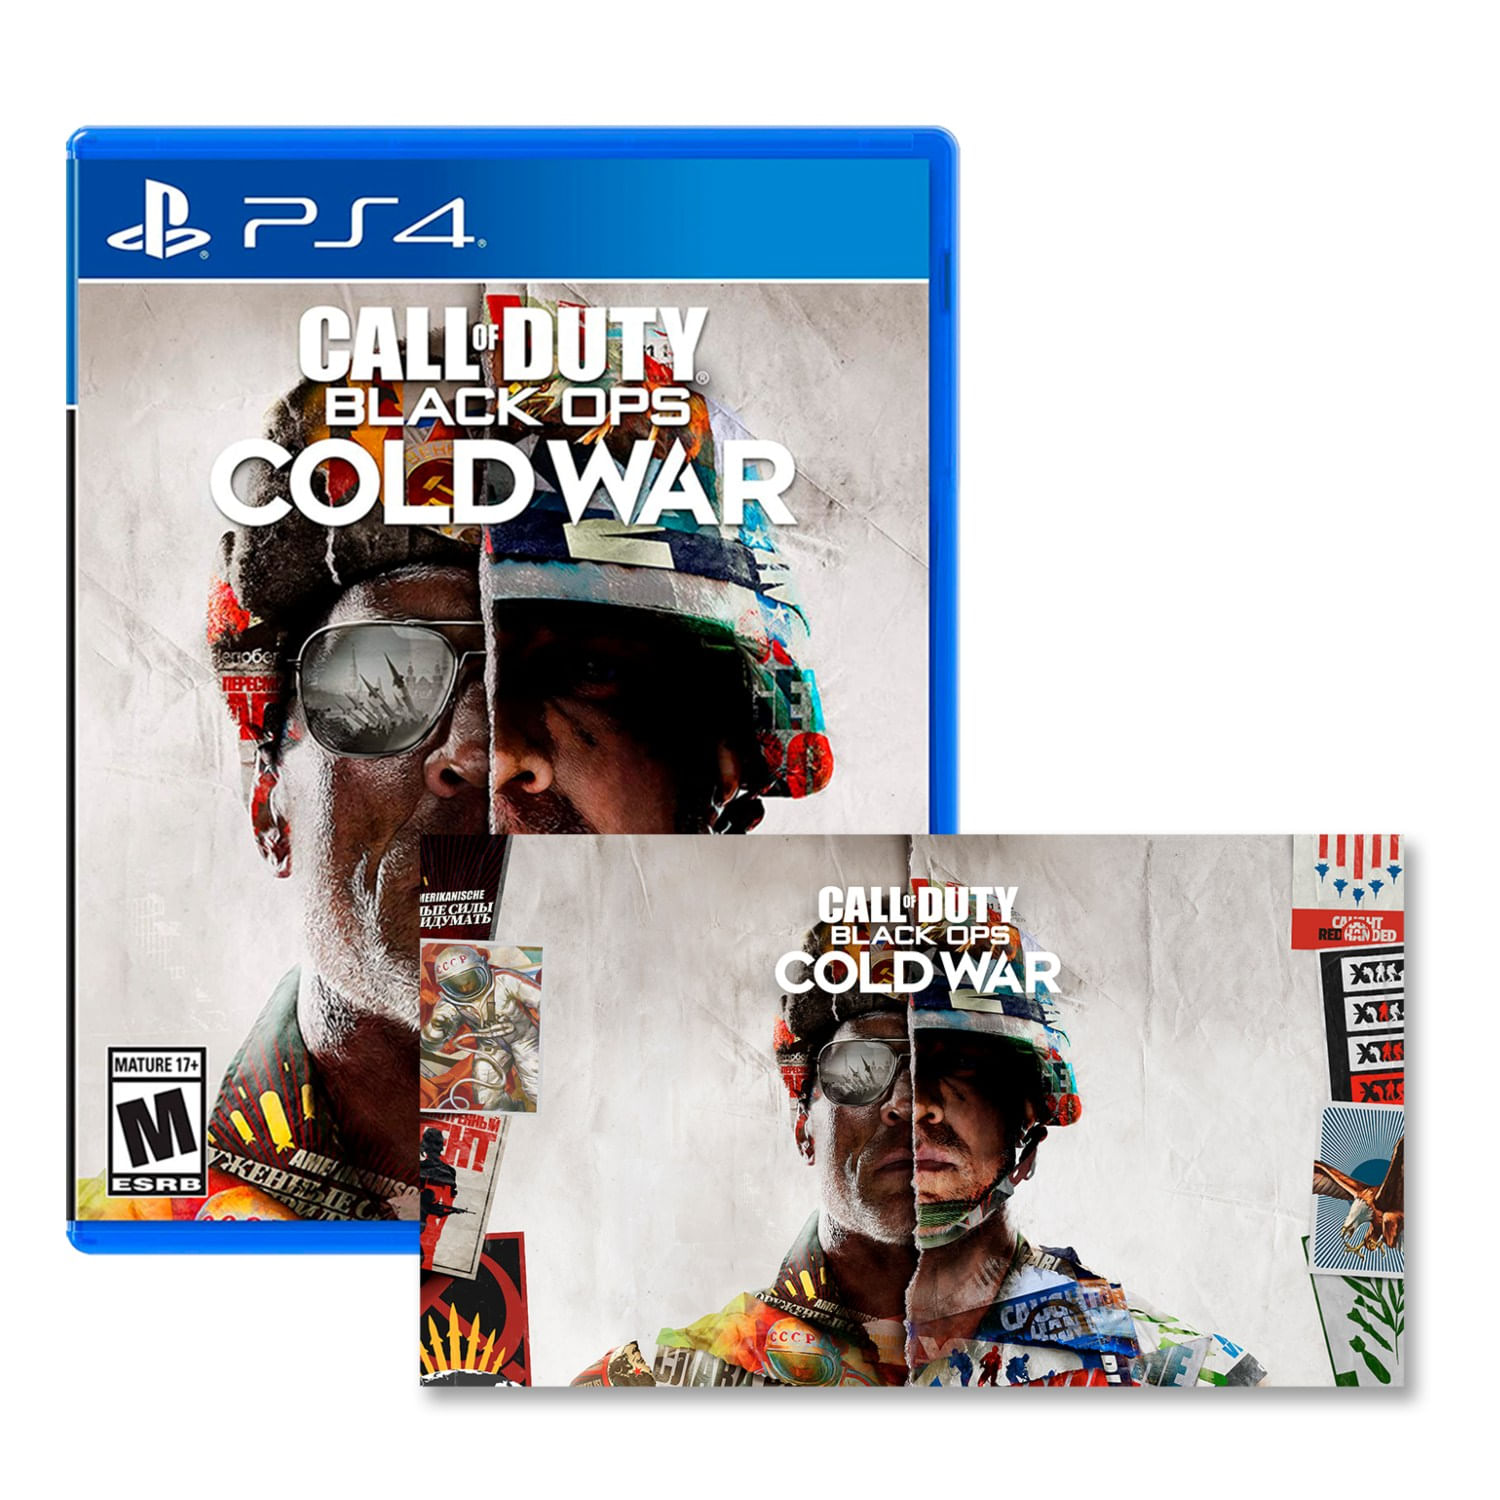 Juego Ps4 Call Of Duty Black Ops Cold War + Poster